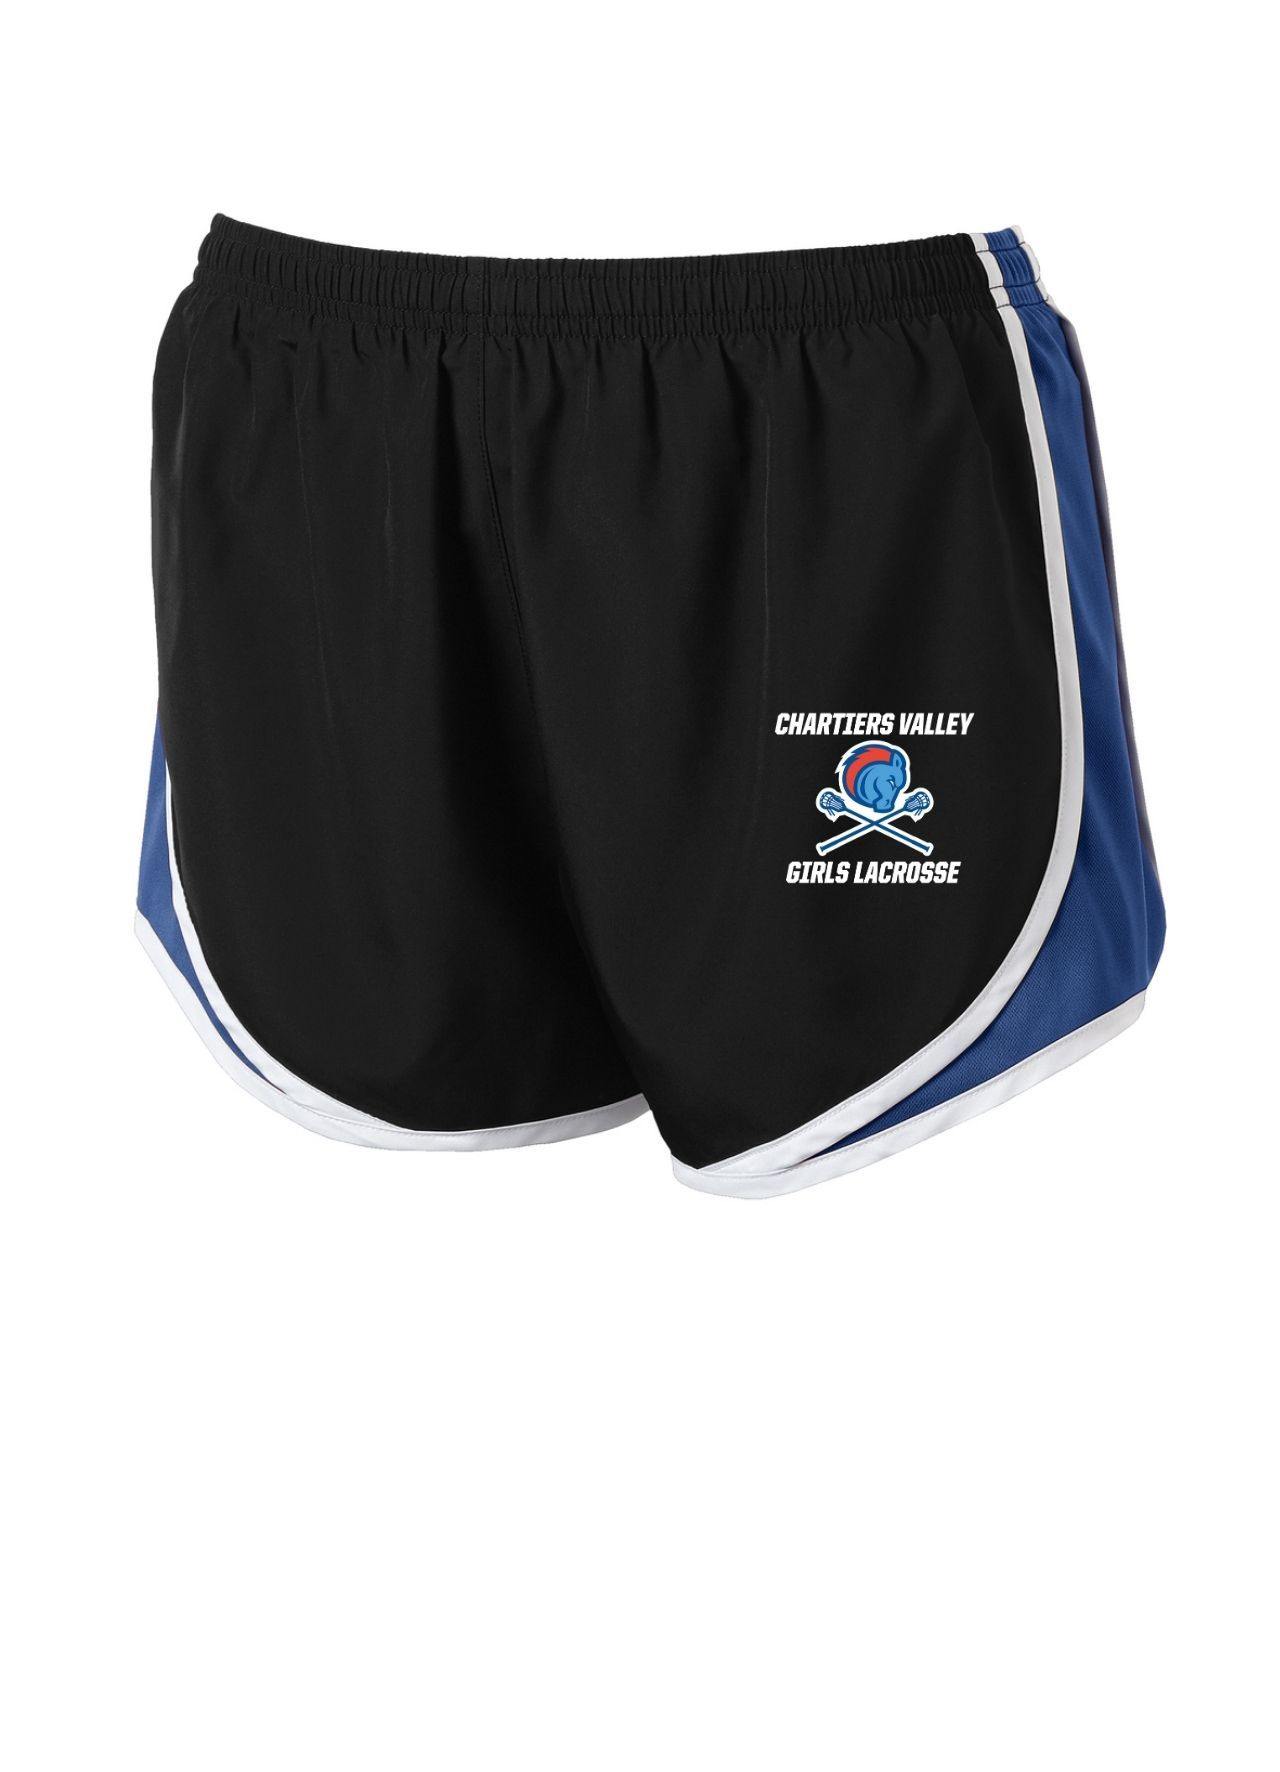 Chartiers Valley Ladies Cadence Short - Black/Royal